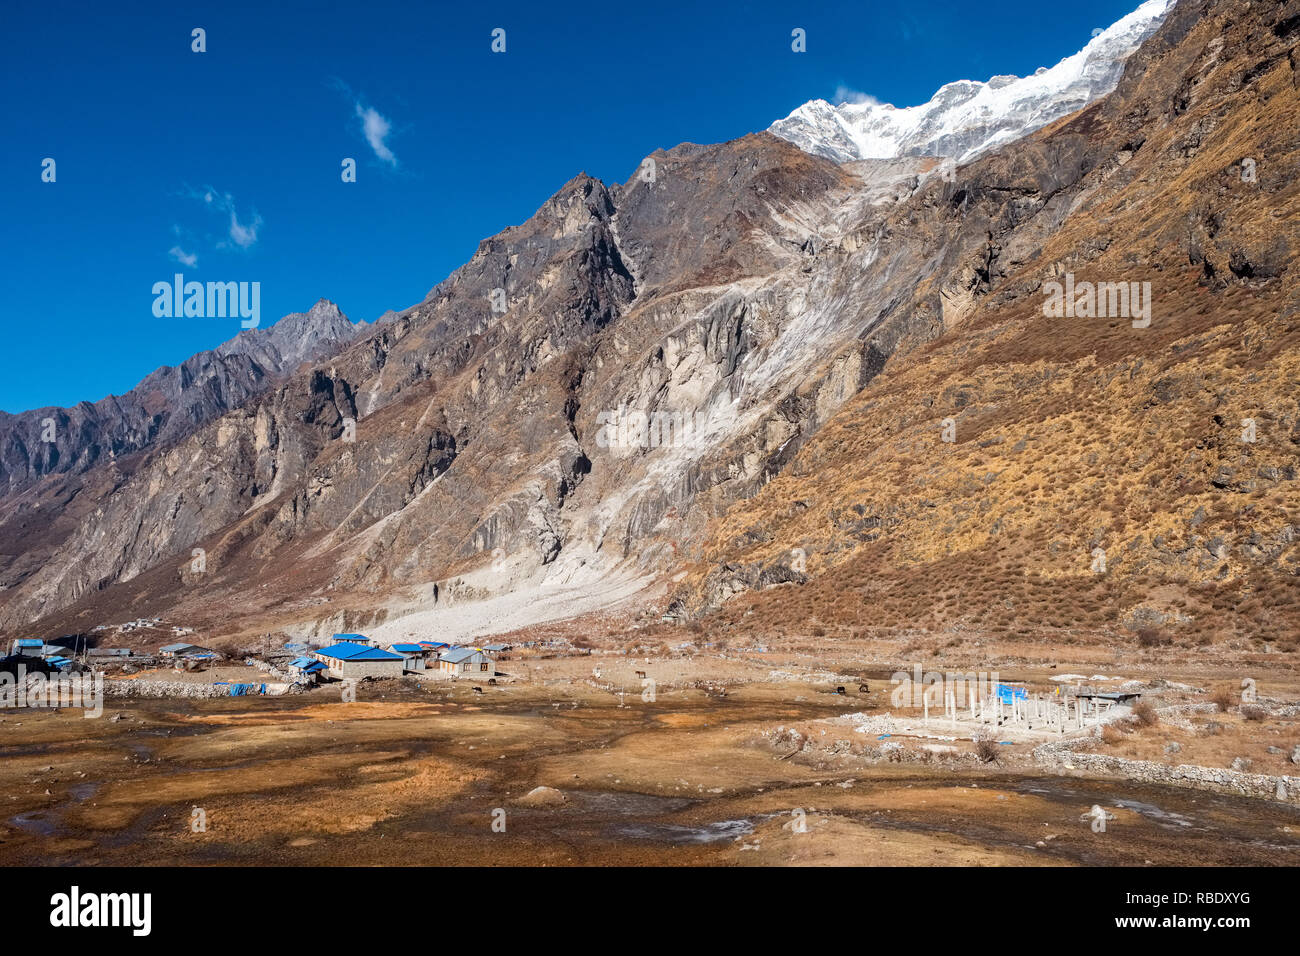 The rebuilt village of Langtang. The original village was wiped out by the landslide seen in the distance in the 2015 Nepal earthquake Stock Photo